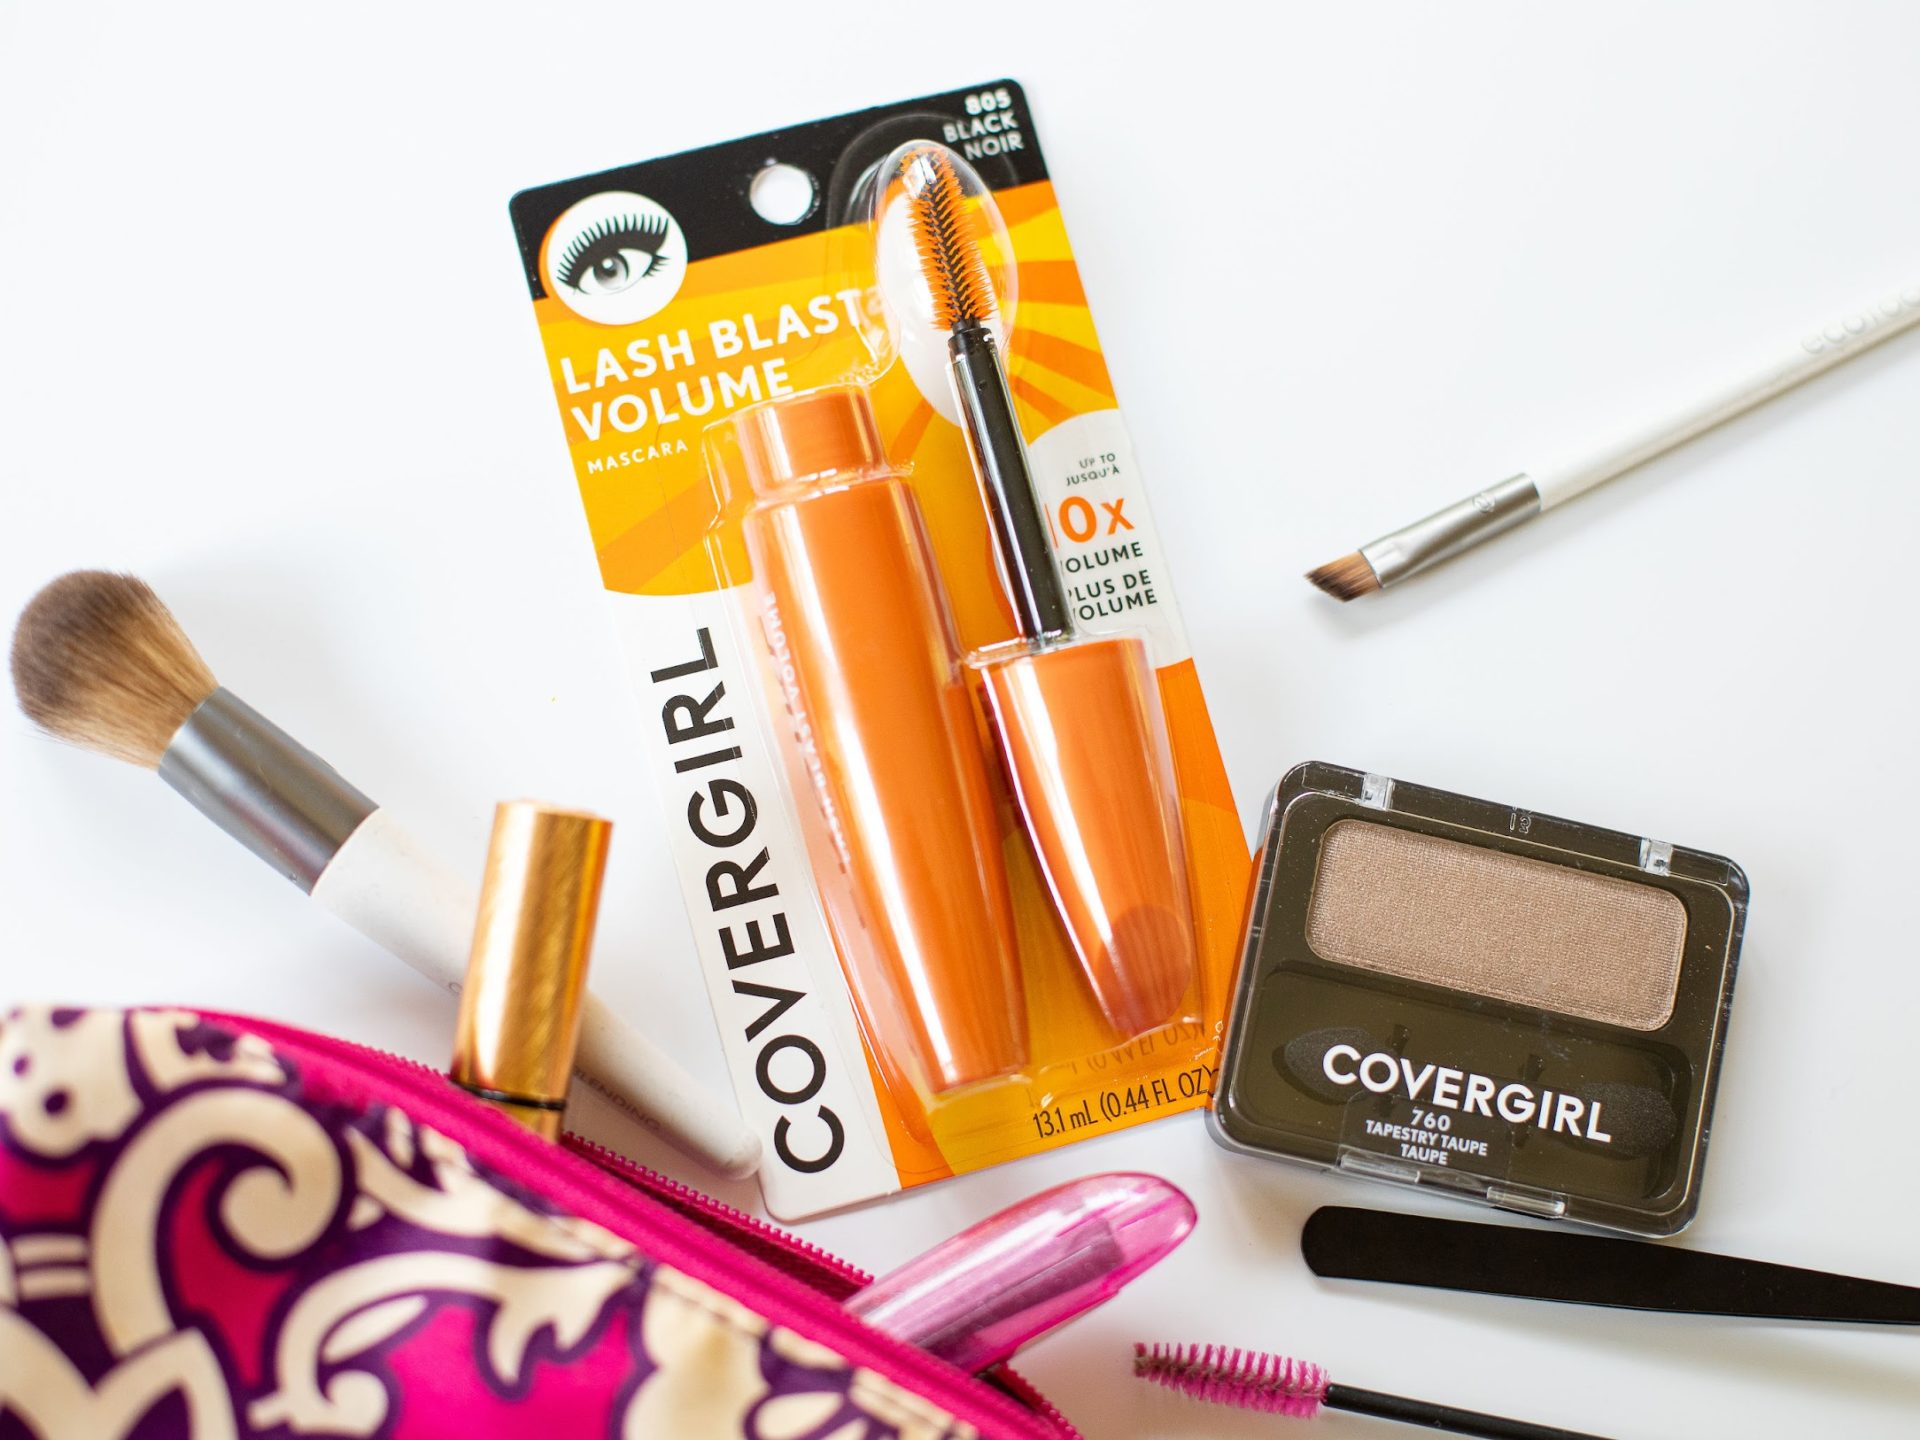 New Covergirl Coupons For The Kroger Sale – Get Last Blast Mascara For As Low As $3.33 (Regular Price $9.49)